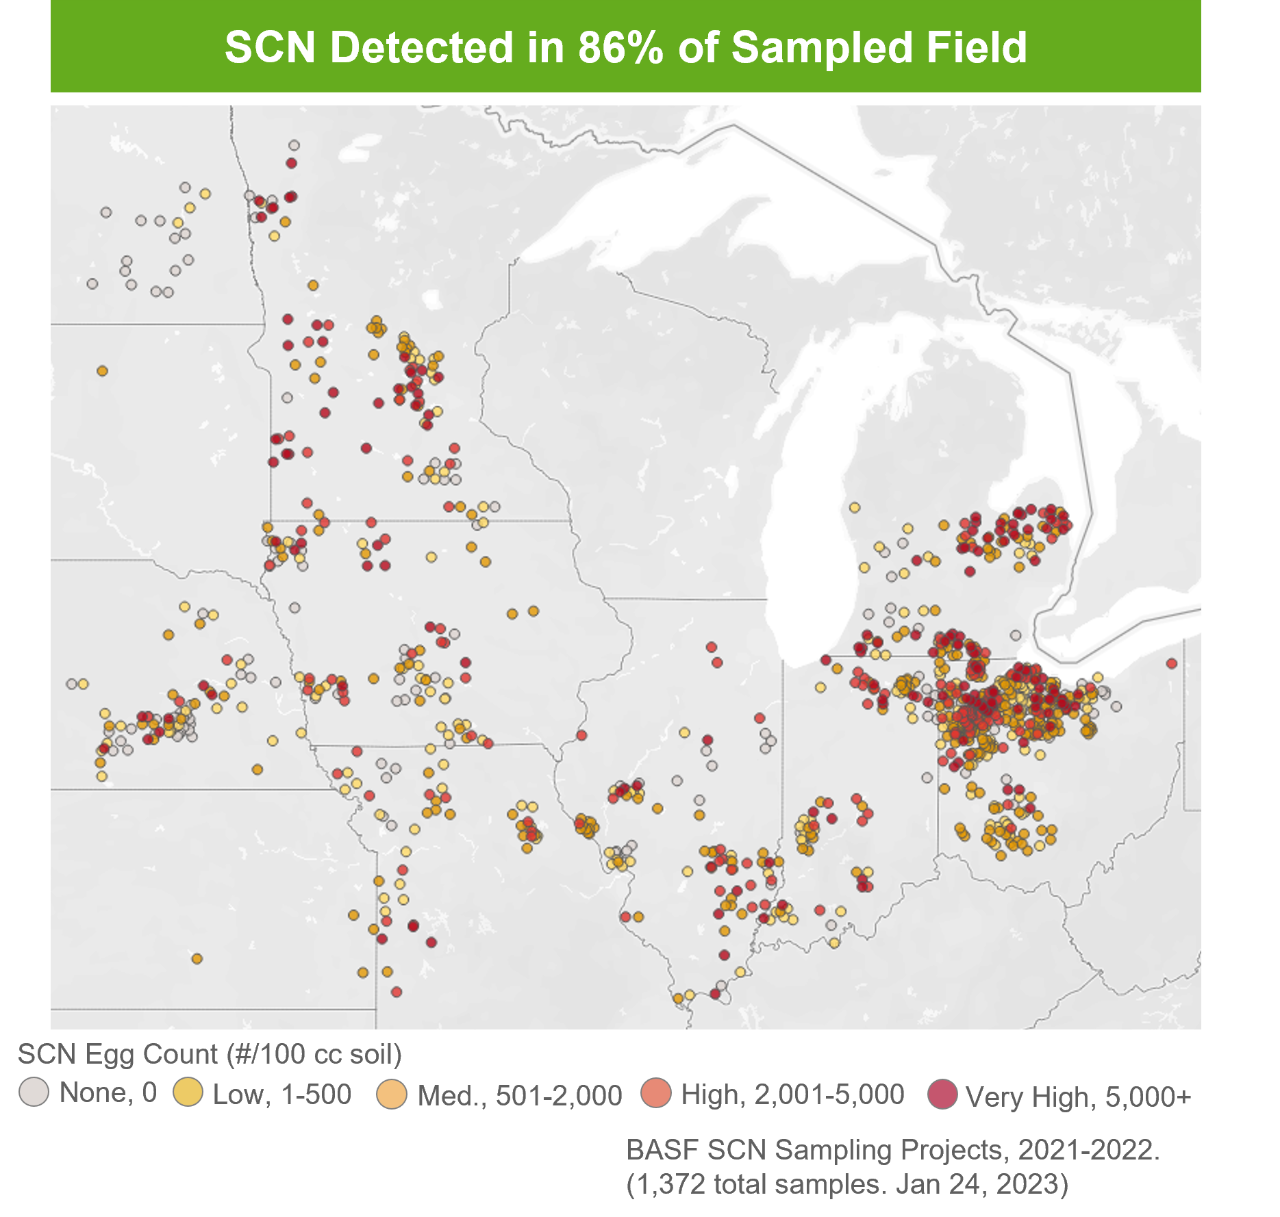 Soybean Cyst Nematode was detected in 86% of sampled fields.